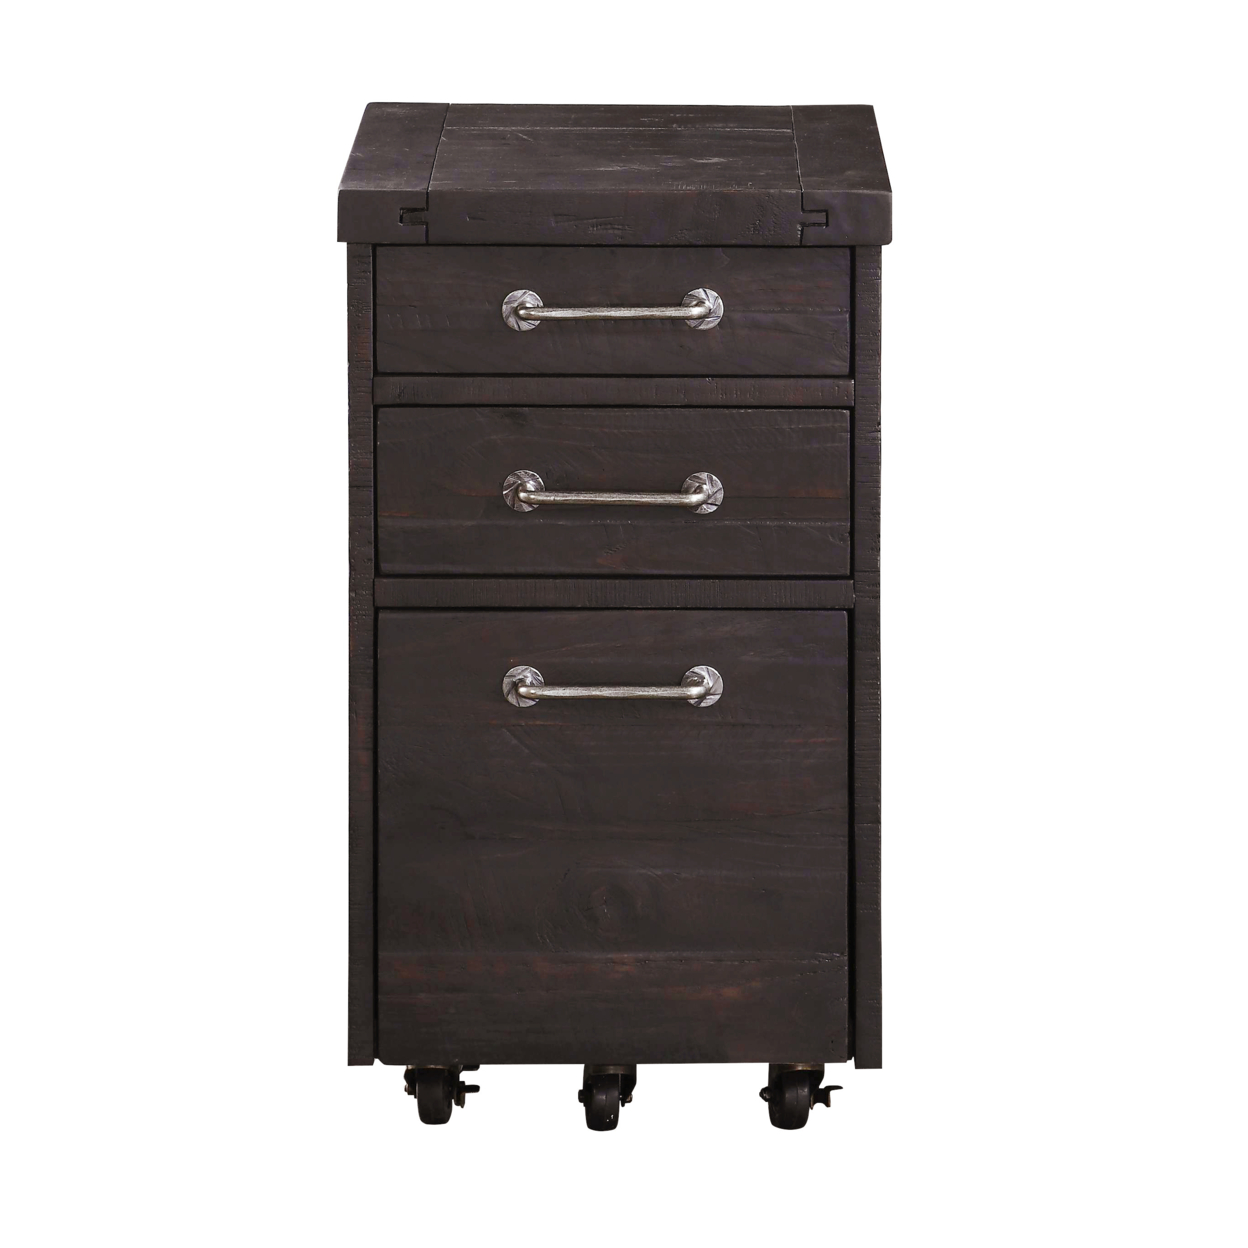 Three Drawers Solid Pine Wood File Cabinet With Rolling Casters, Cafe Brown- Saltoro Sherpi